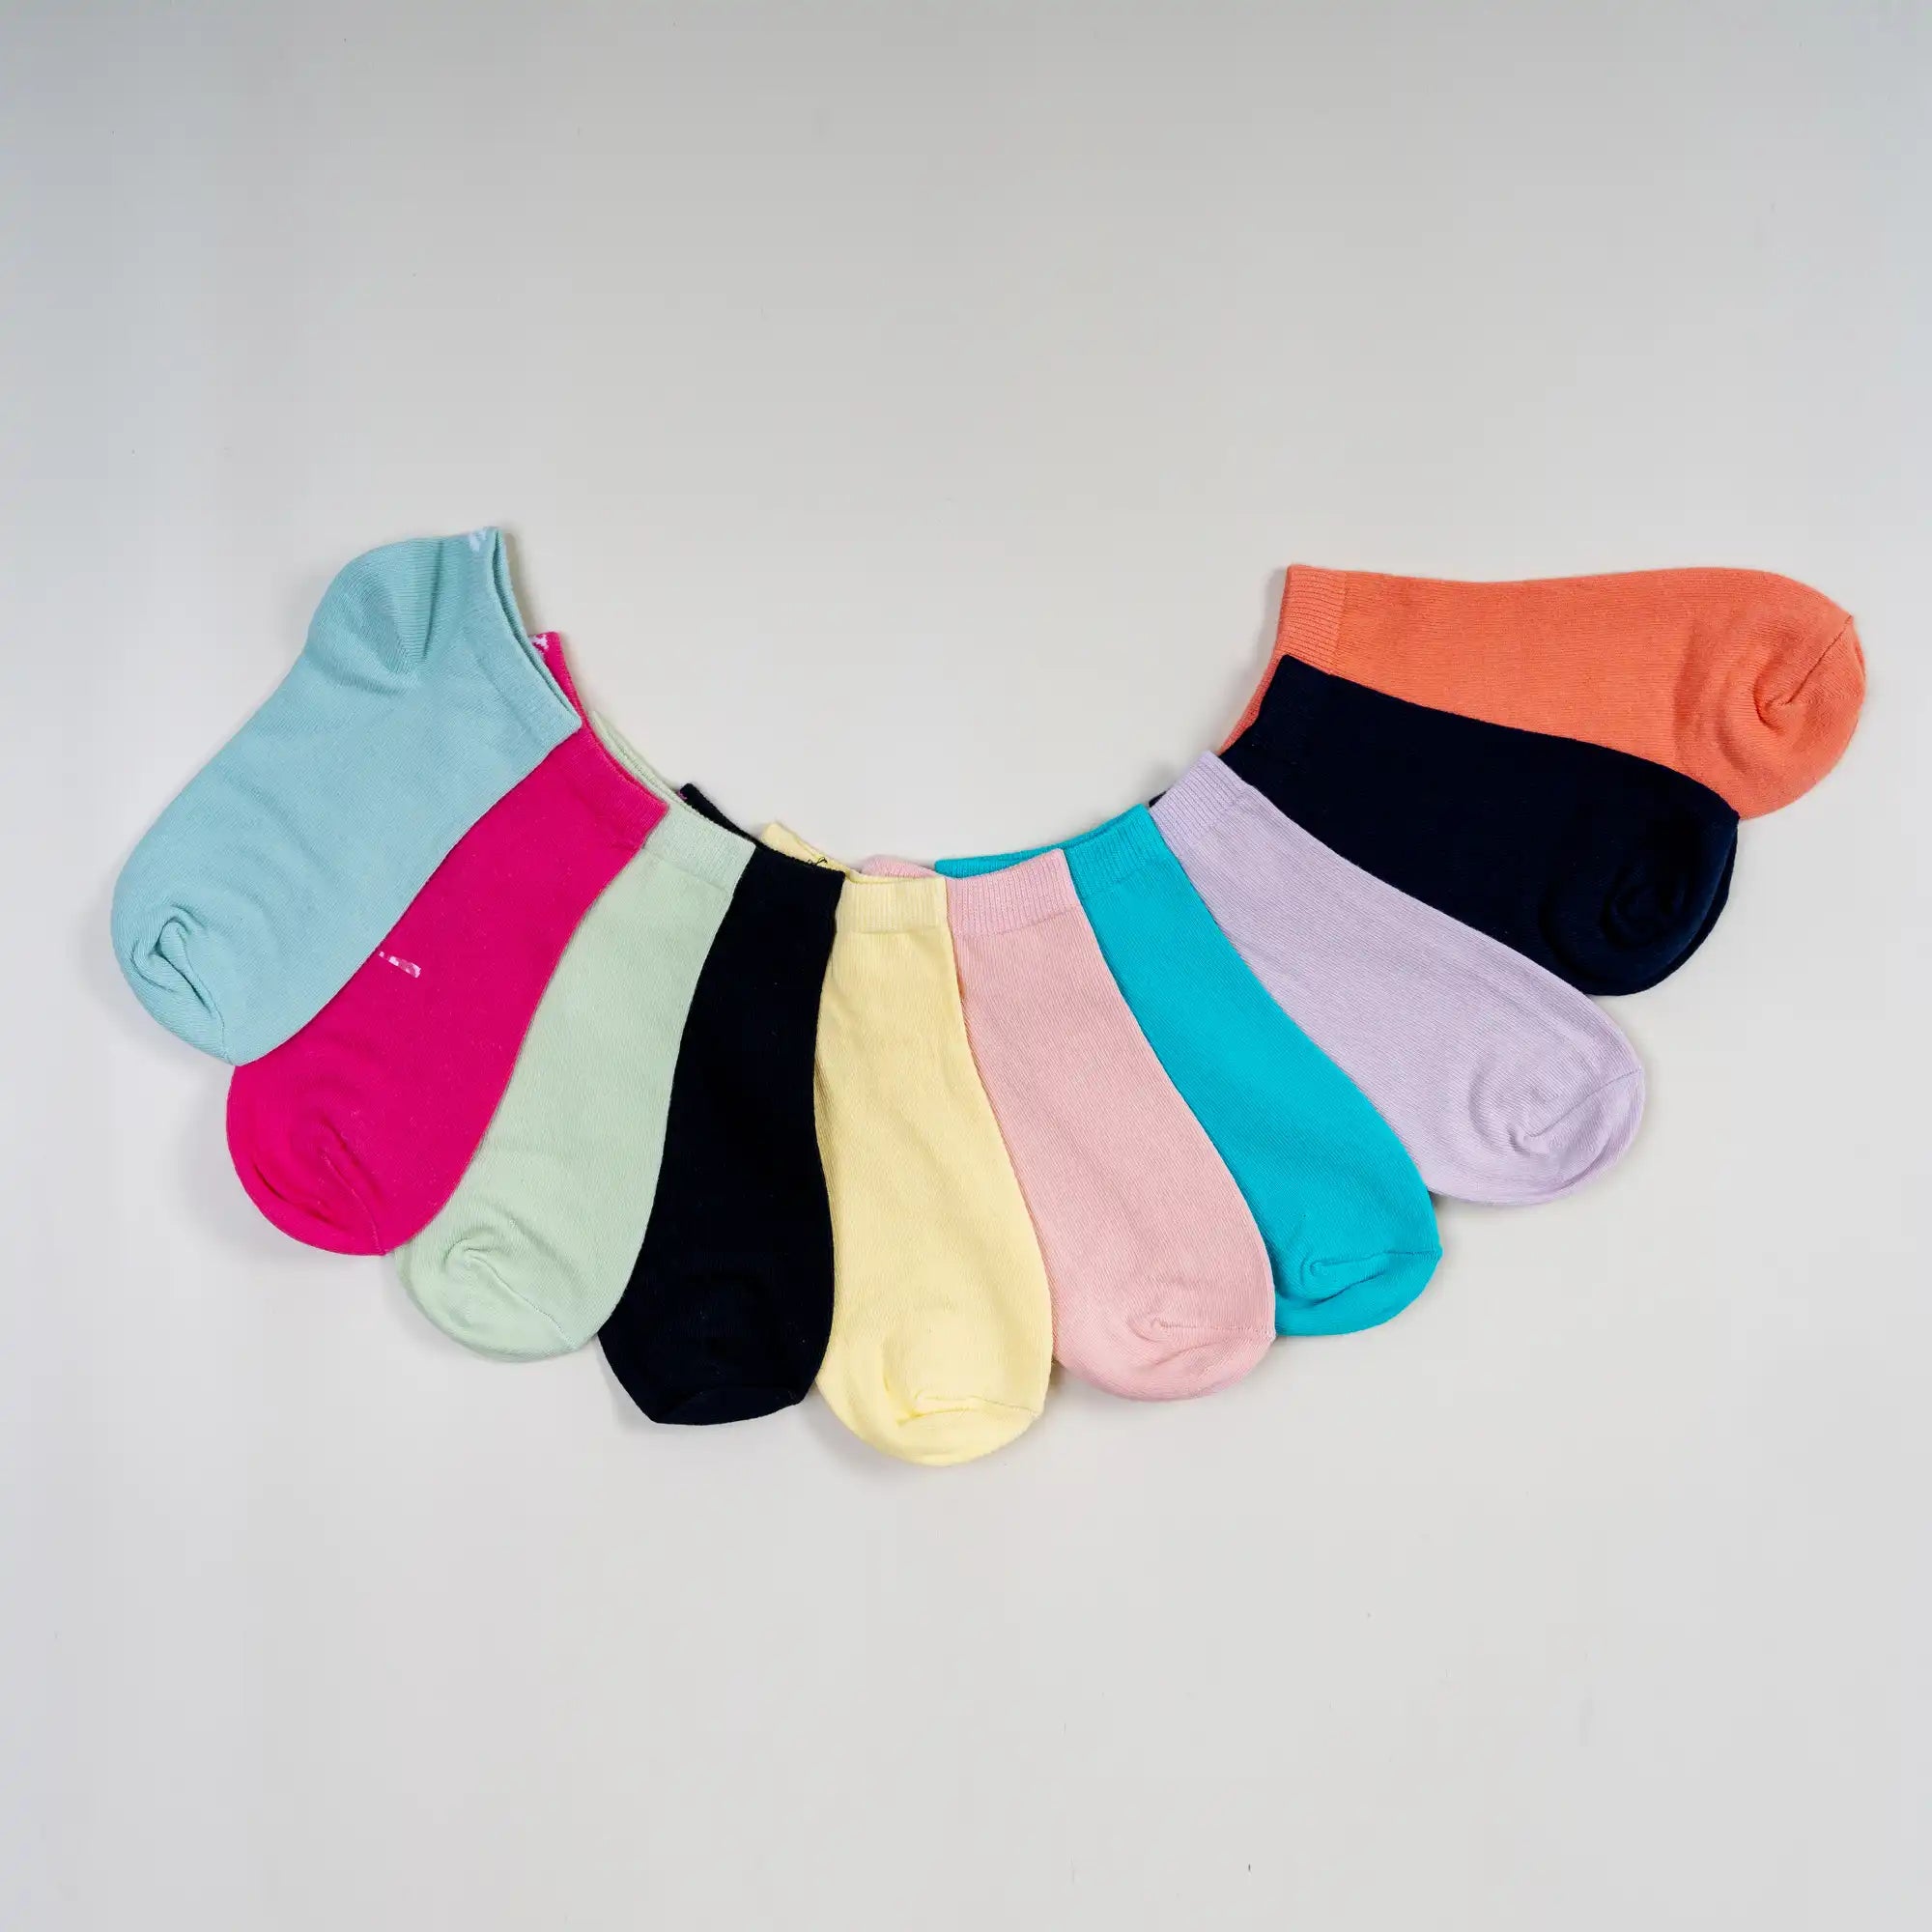 Young Wings Women's Multi Colour Cotton Fabric Solid Low Ankle Length Socks - Pack of 10, Style no. W1-6015